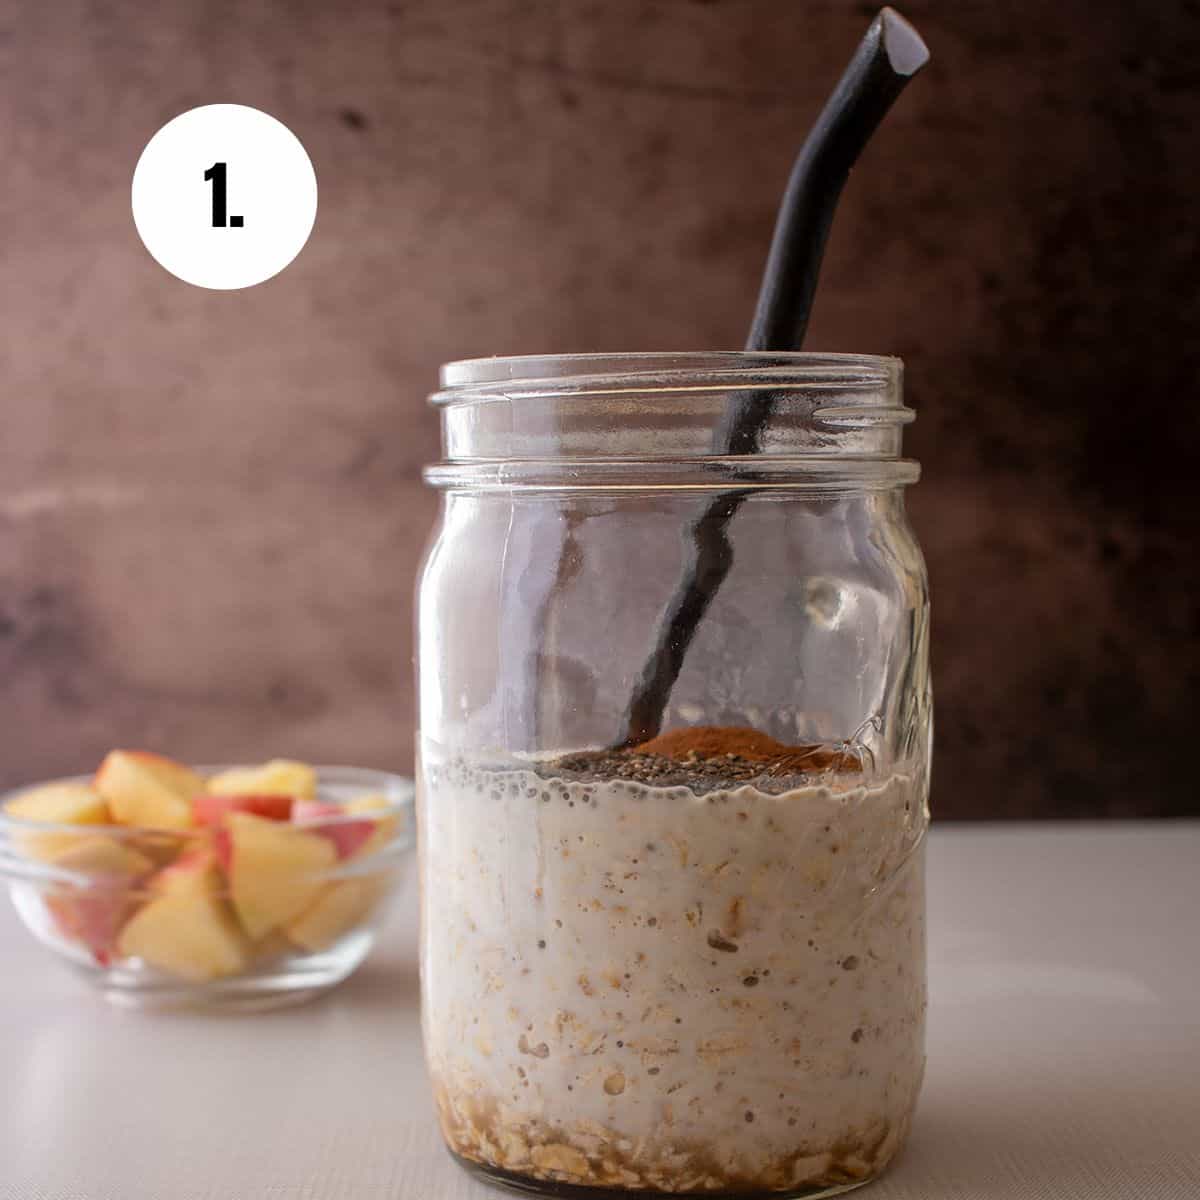 apple cinnamon overnight oats ingredients in a glass jar with a spoon. Apples in a glass bowl in the background.